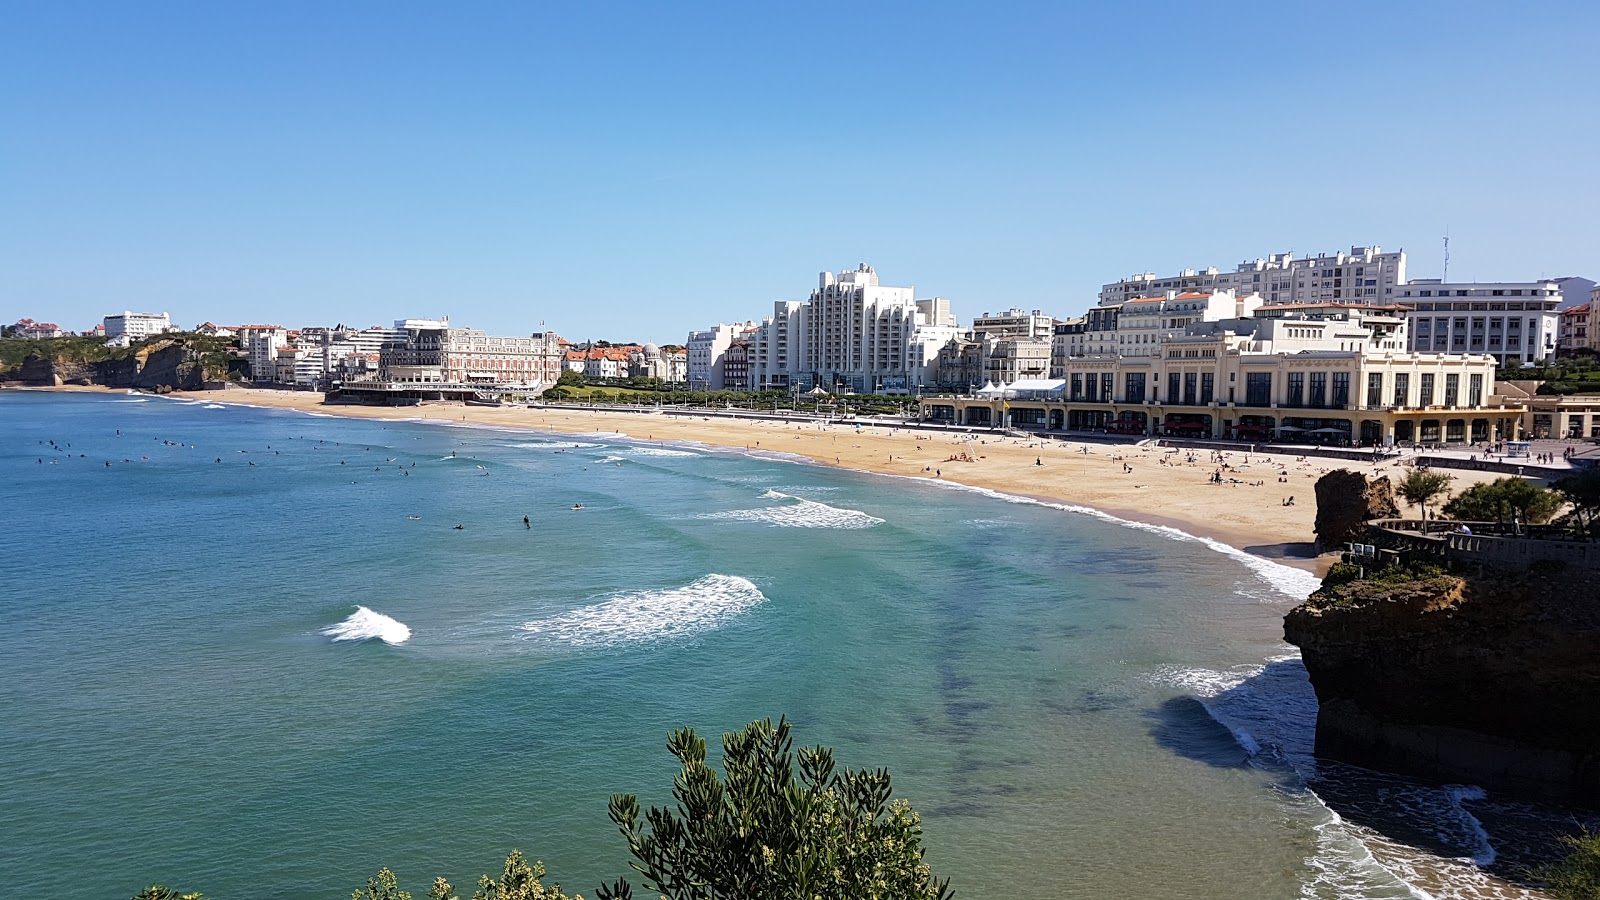 Photo of Plage de Biarritz surrounded by mountains